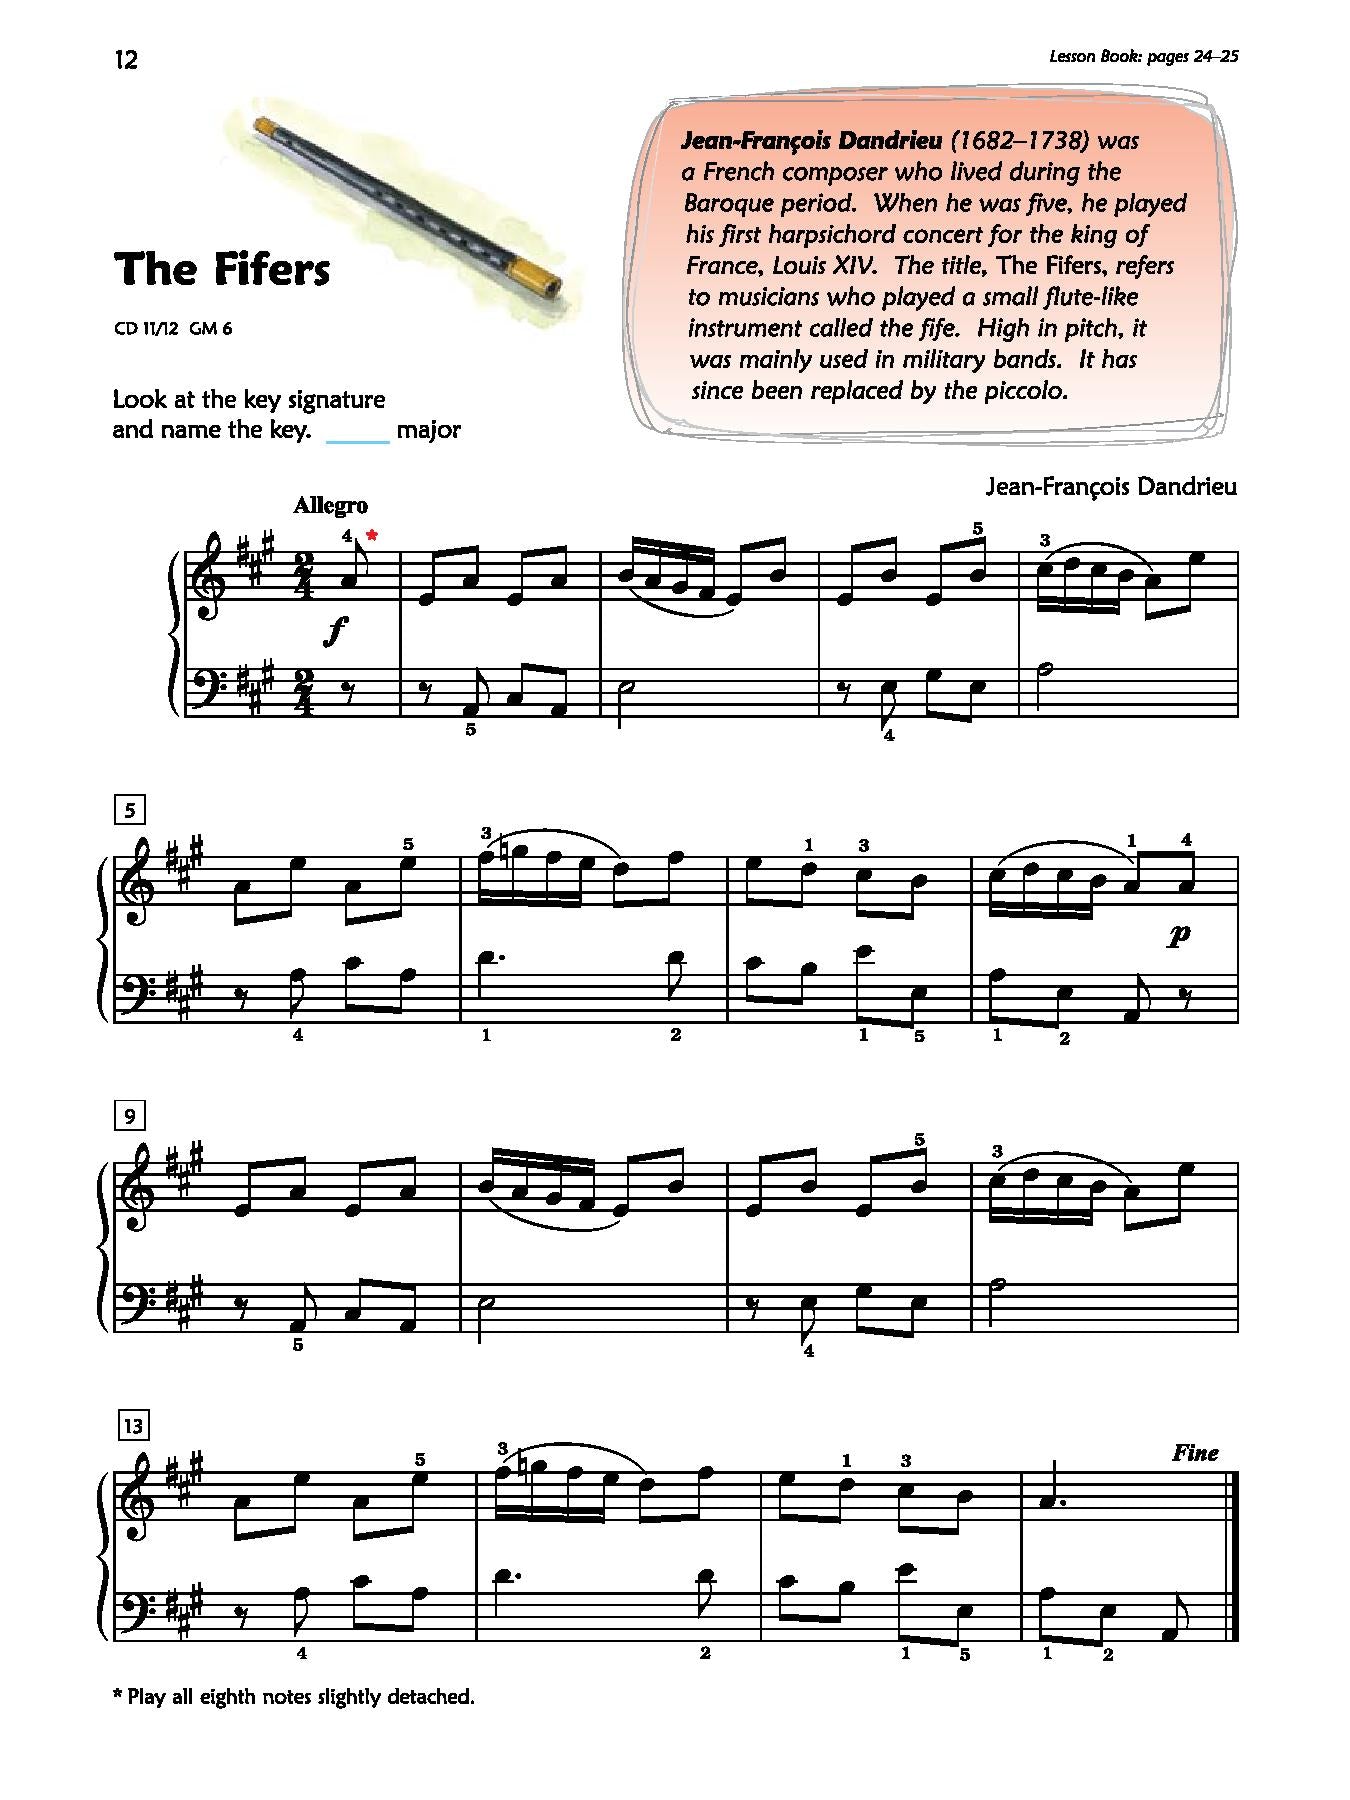 Alfred's Premier Piano Course, Performance 5